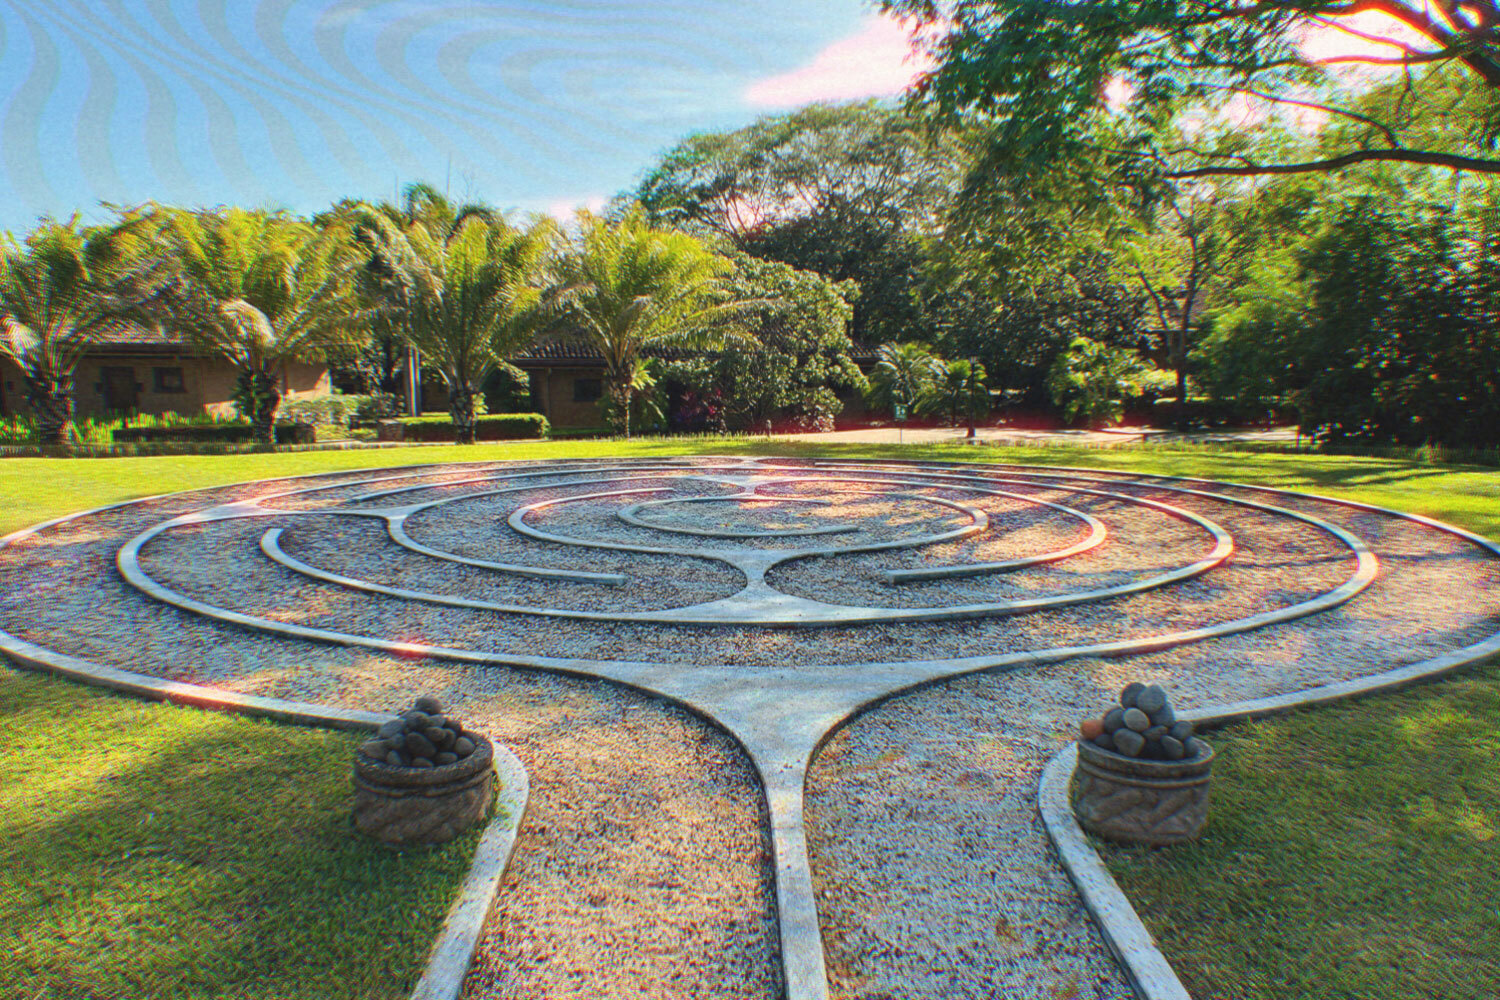 A labyrinth in the grass at Rythmia, a Costa Rica retreat that offers ayahuasca ceremonies